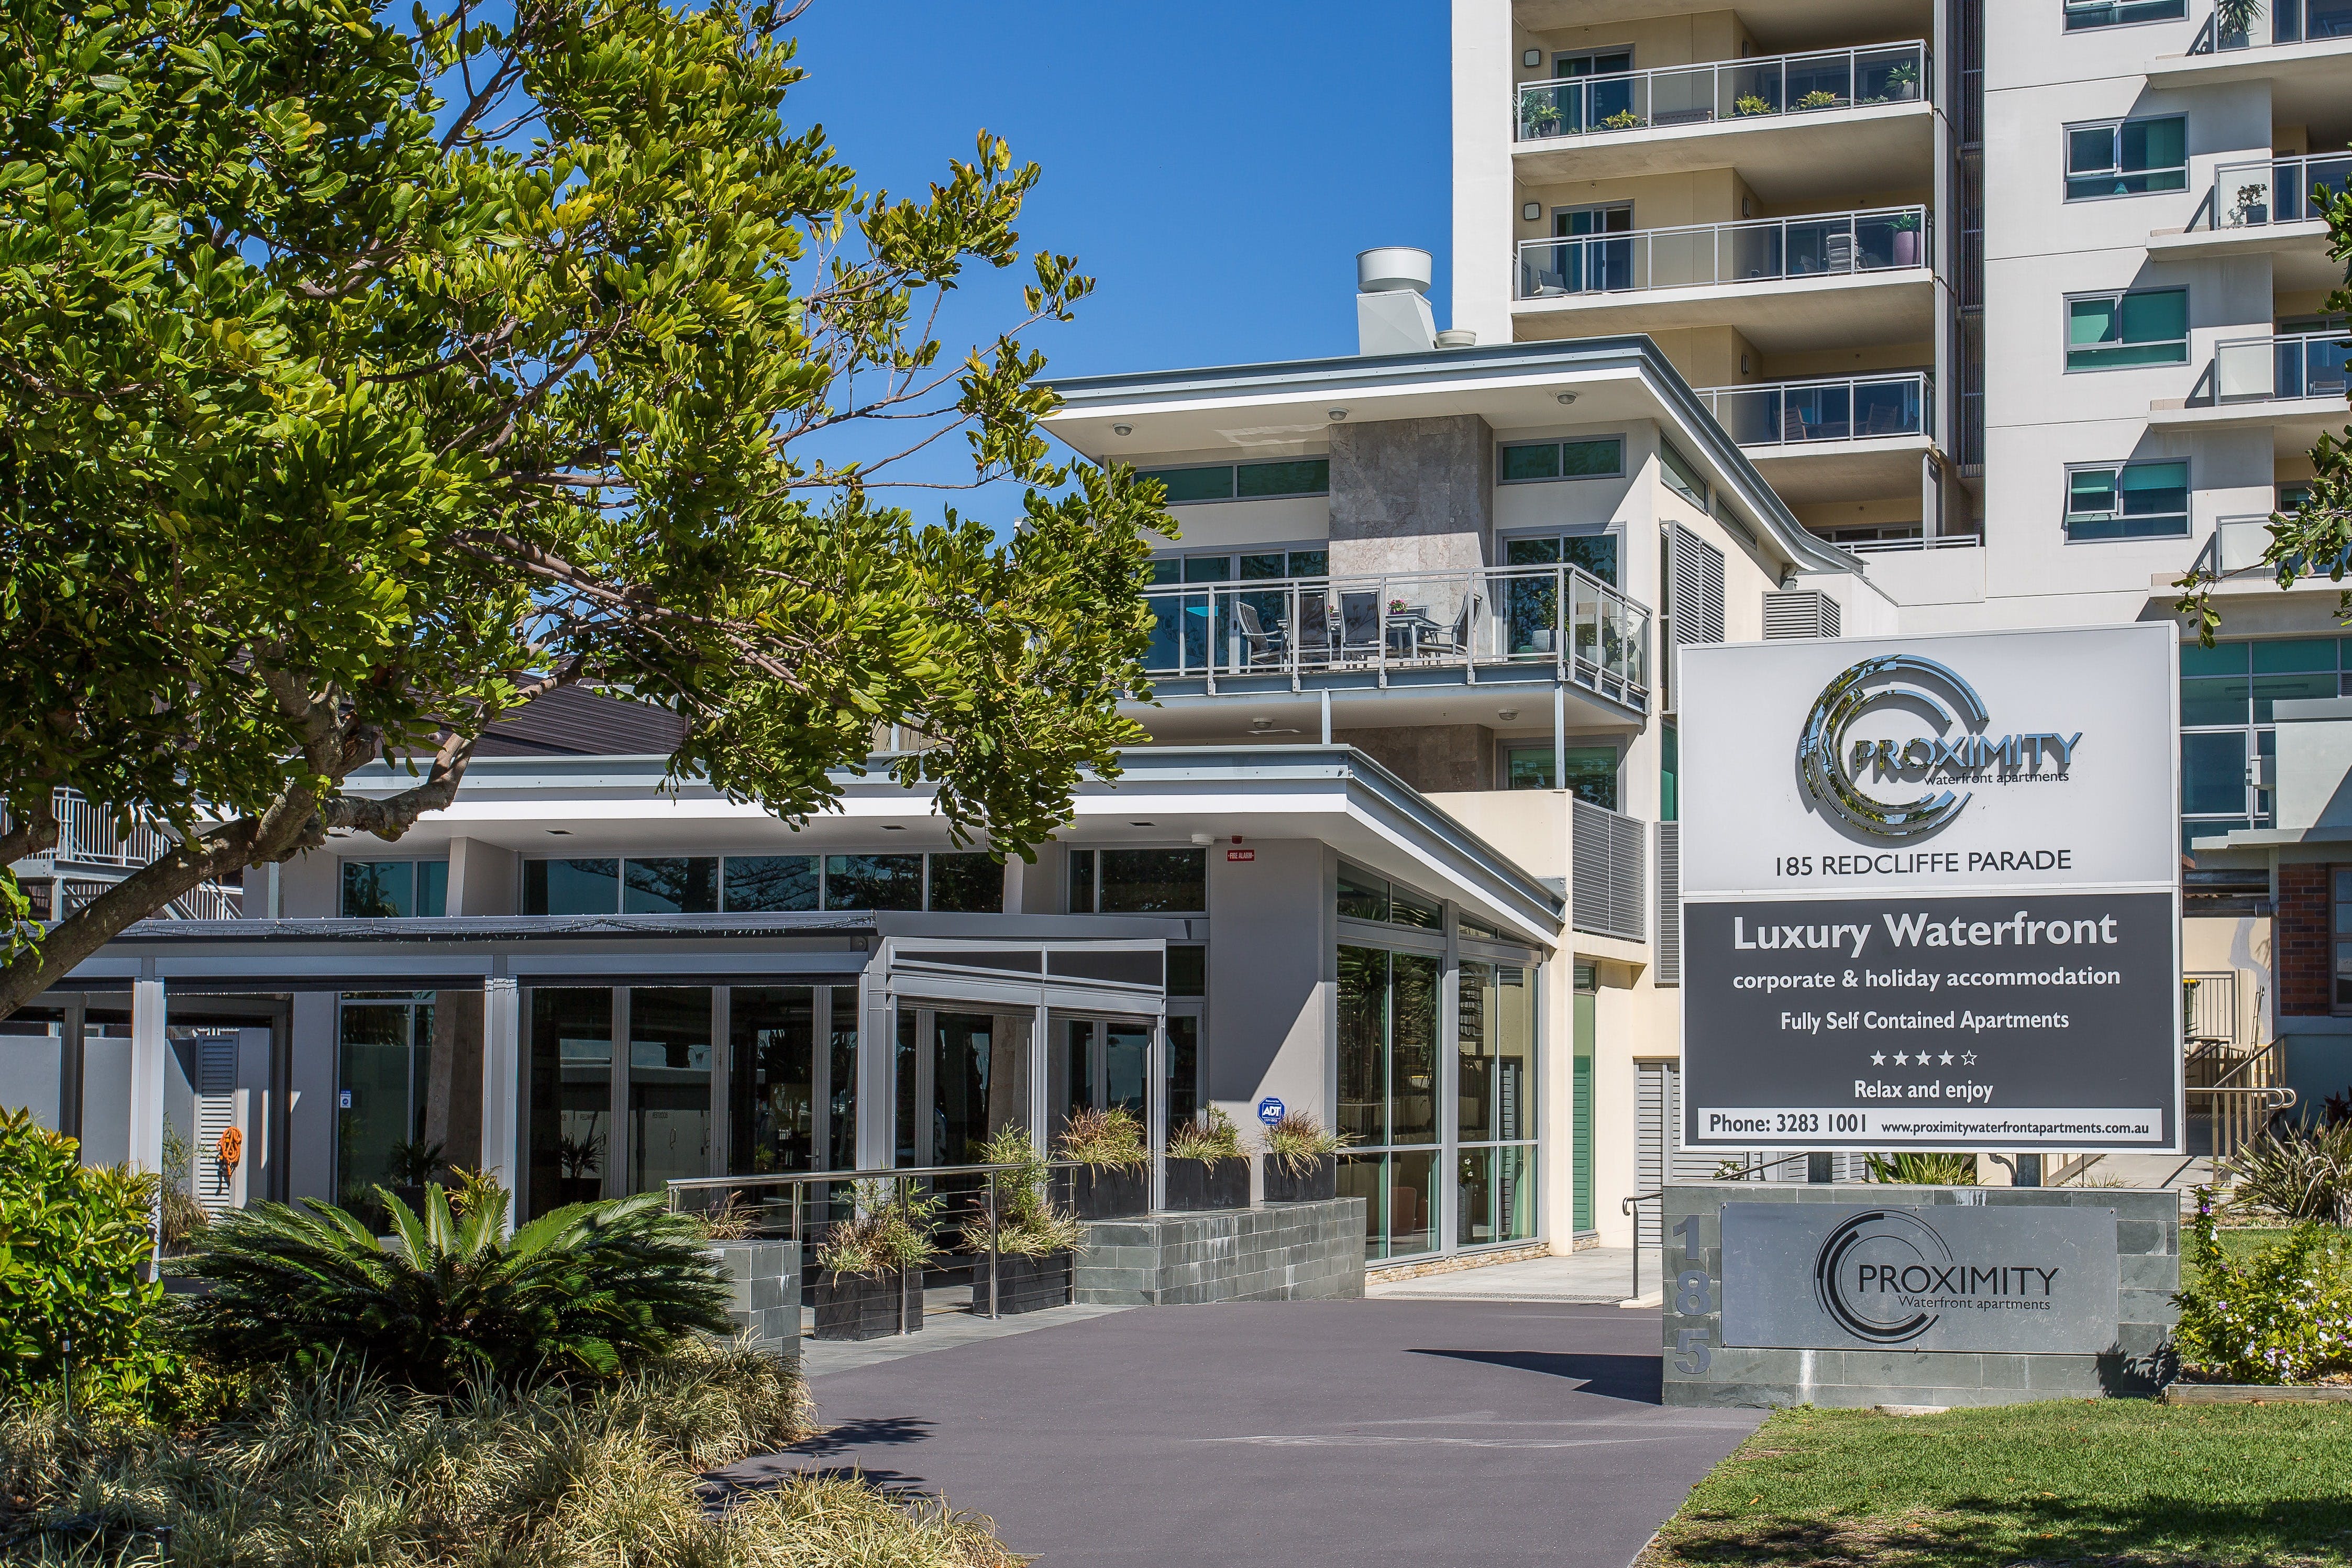 Proximity Waterfront Apartments - Coogee Beach Accommodation